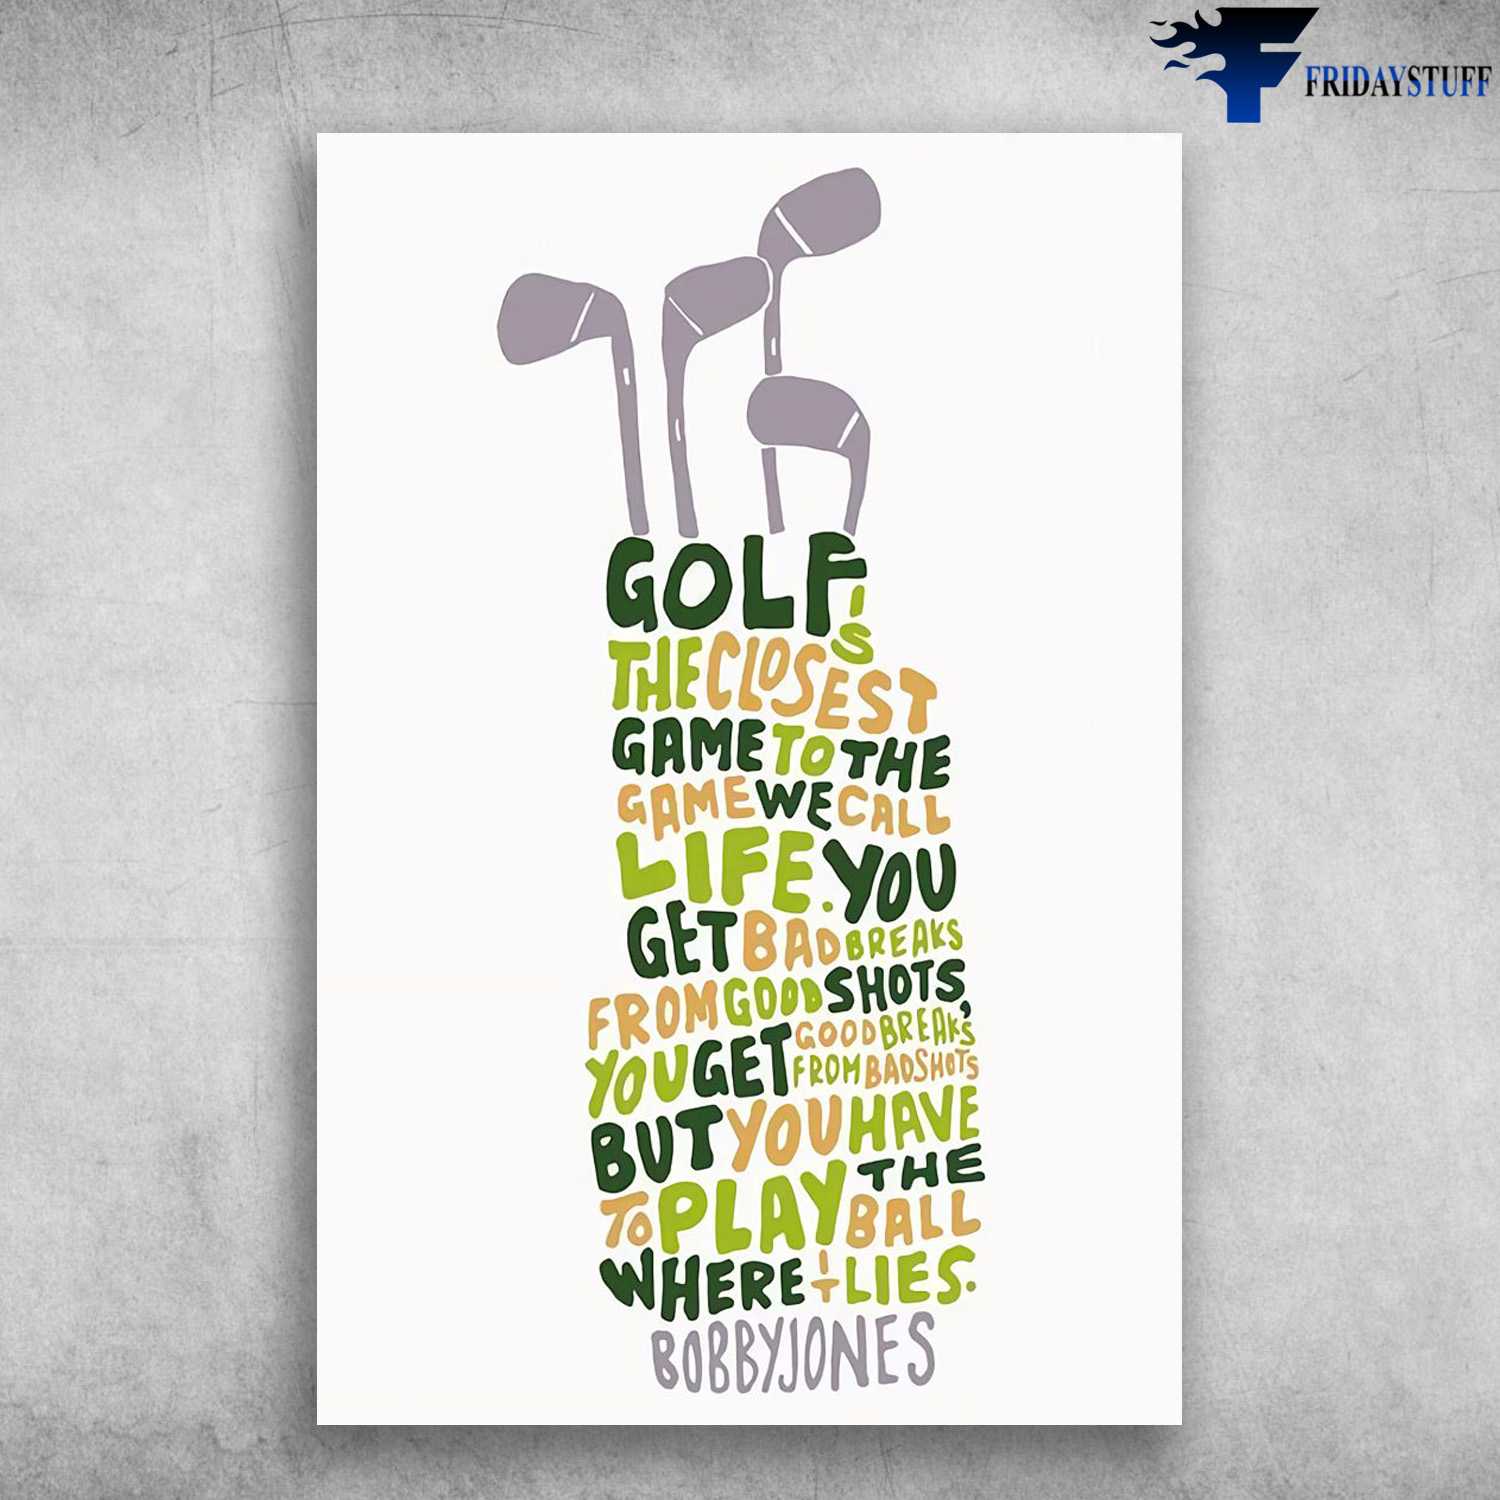 Golf Poster, Golf Decor, Golf Is The Closest Game, To The Game We Call Life, You Get Bad Breaks, From Good Shots, You Get Goof Breaks, From Bad Shots